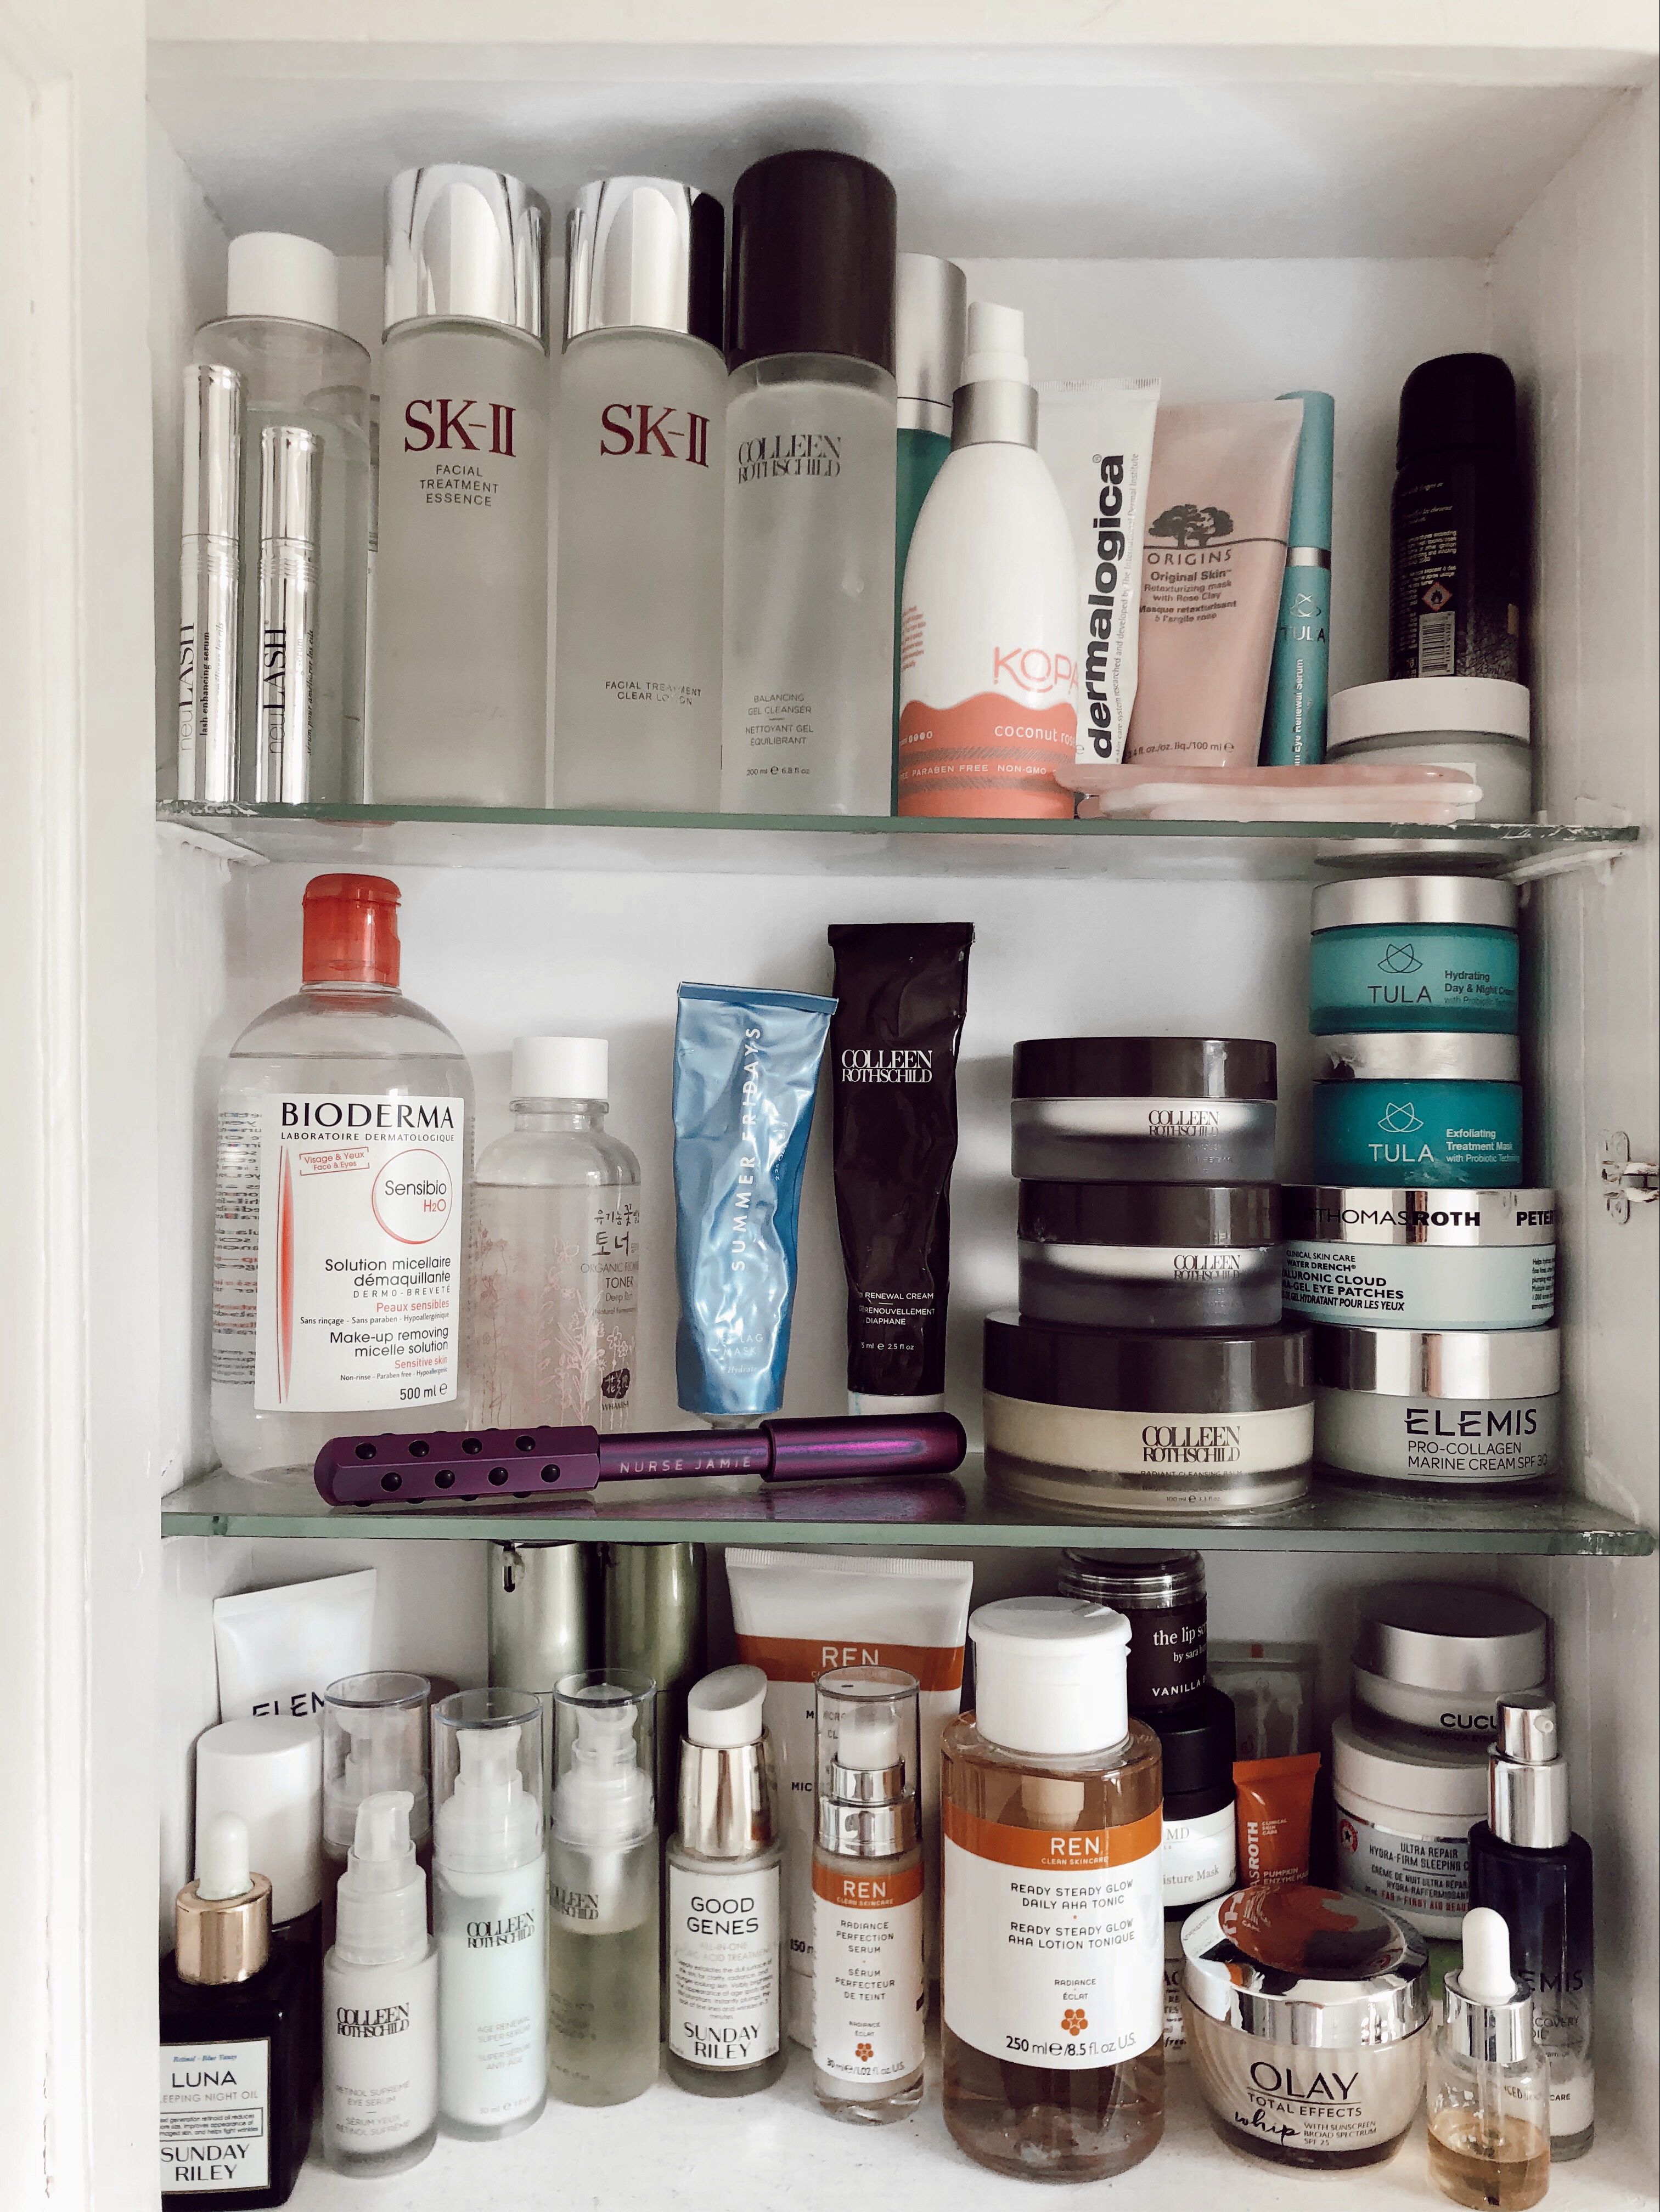 Ashley Zeal from Two Peas in a Prada shares her current skincare routine including her favorite brands: Elemis & Colleen Rothschild. 